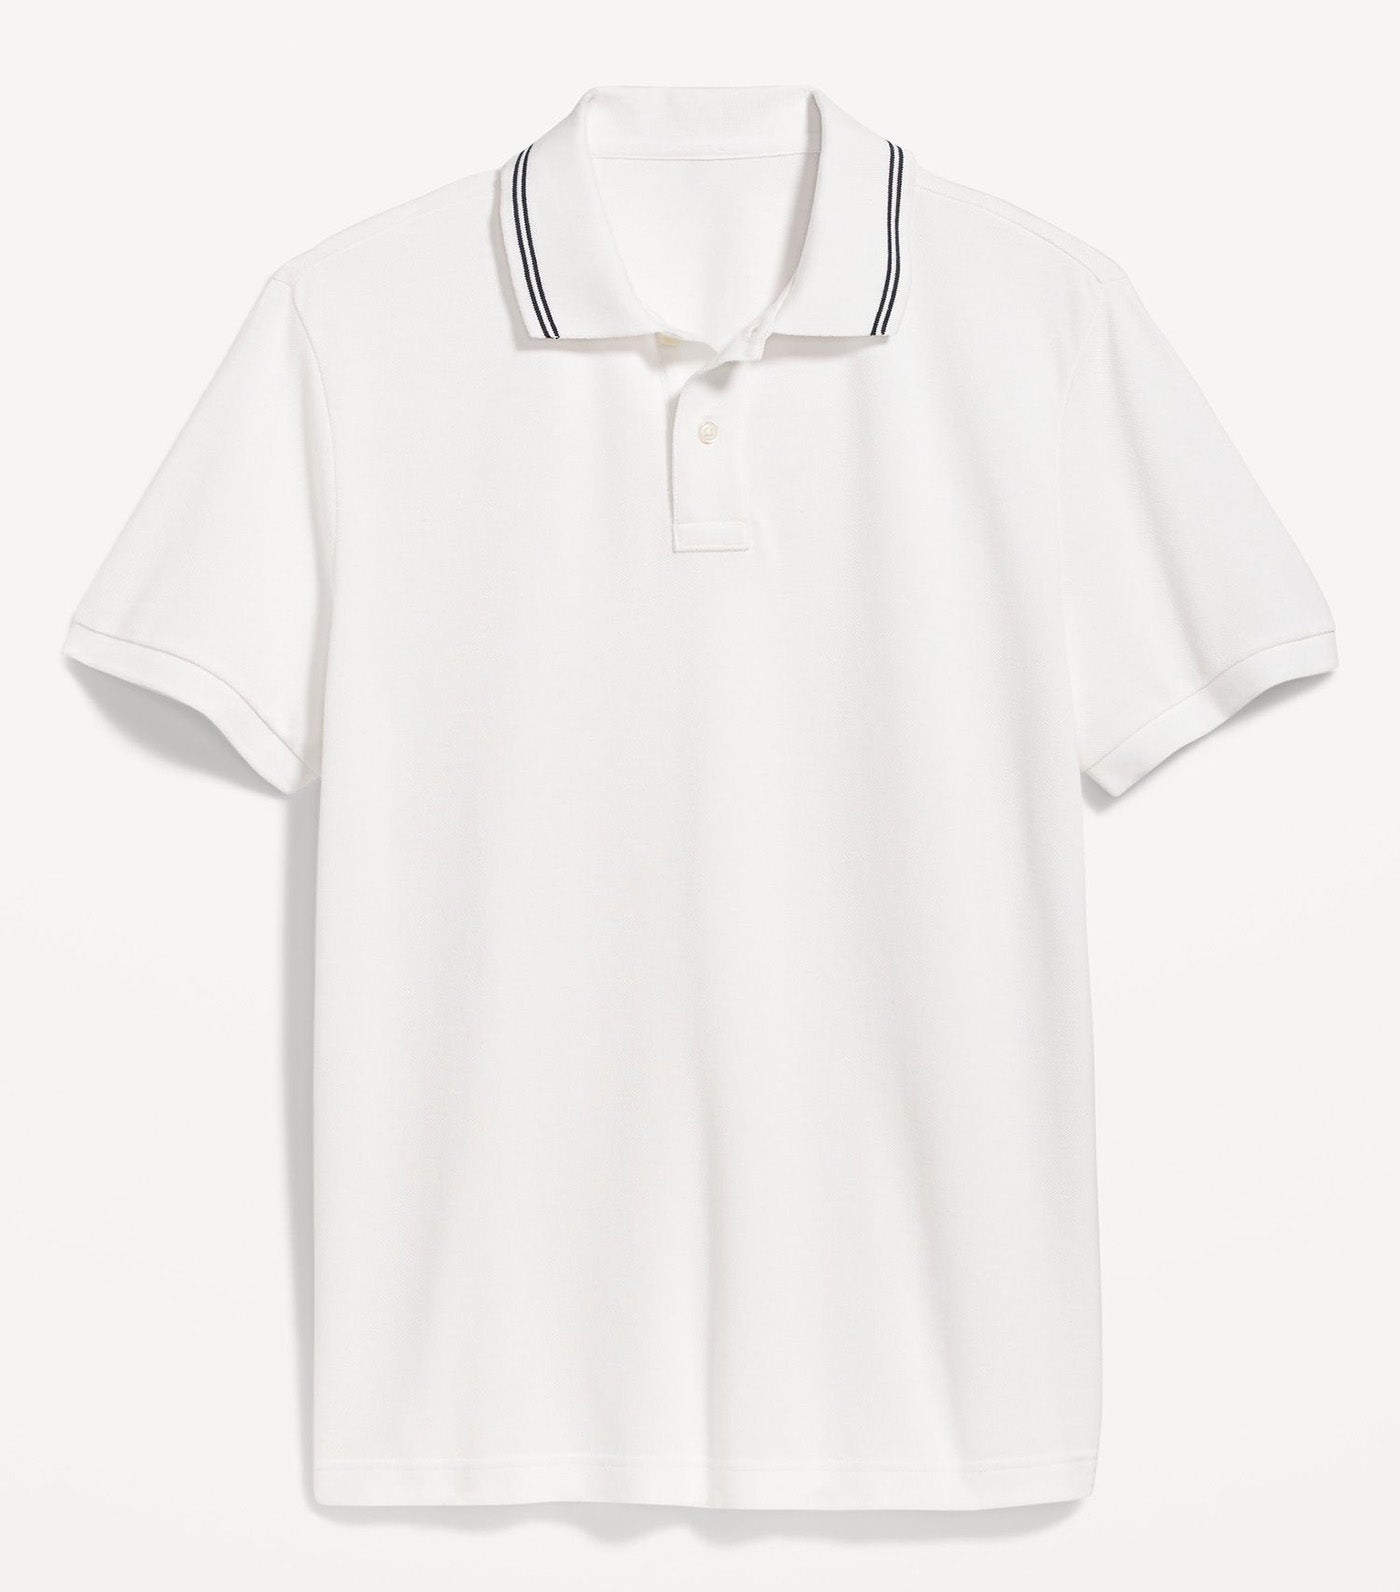 Tipped-Collar Classic Fit Pique Polo for Men White/Navy